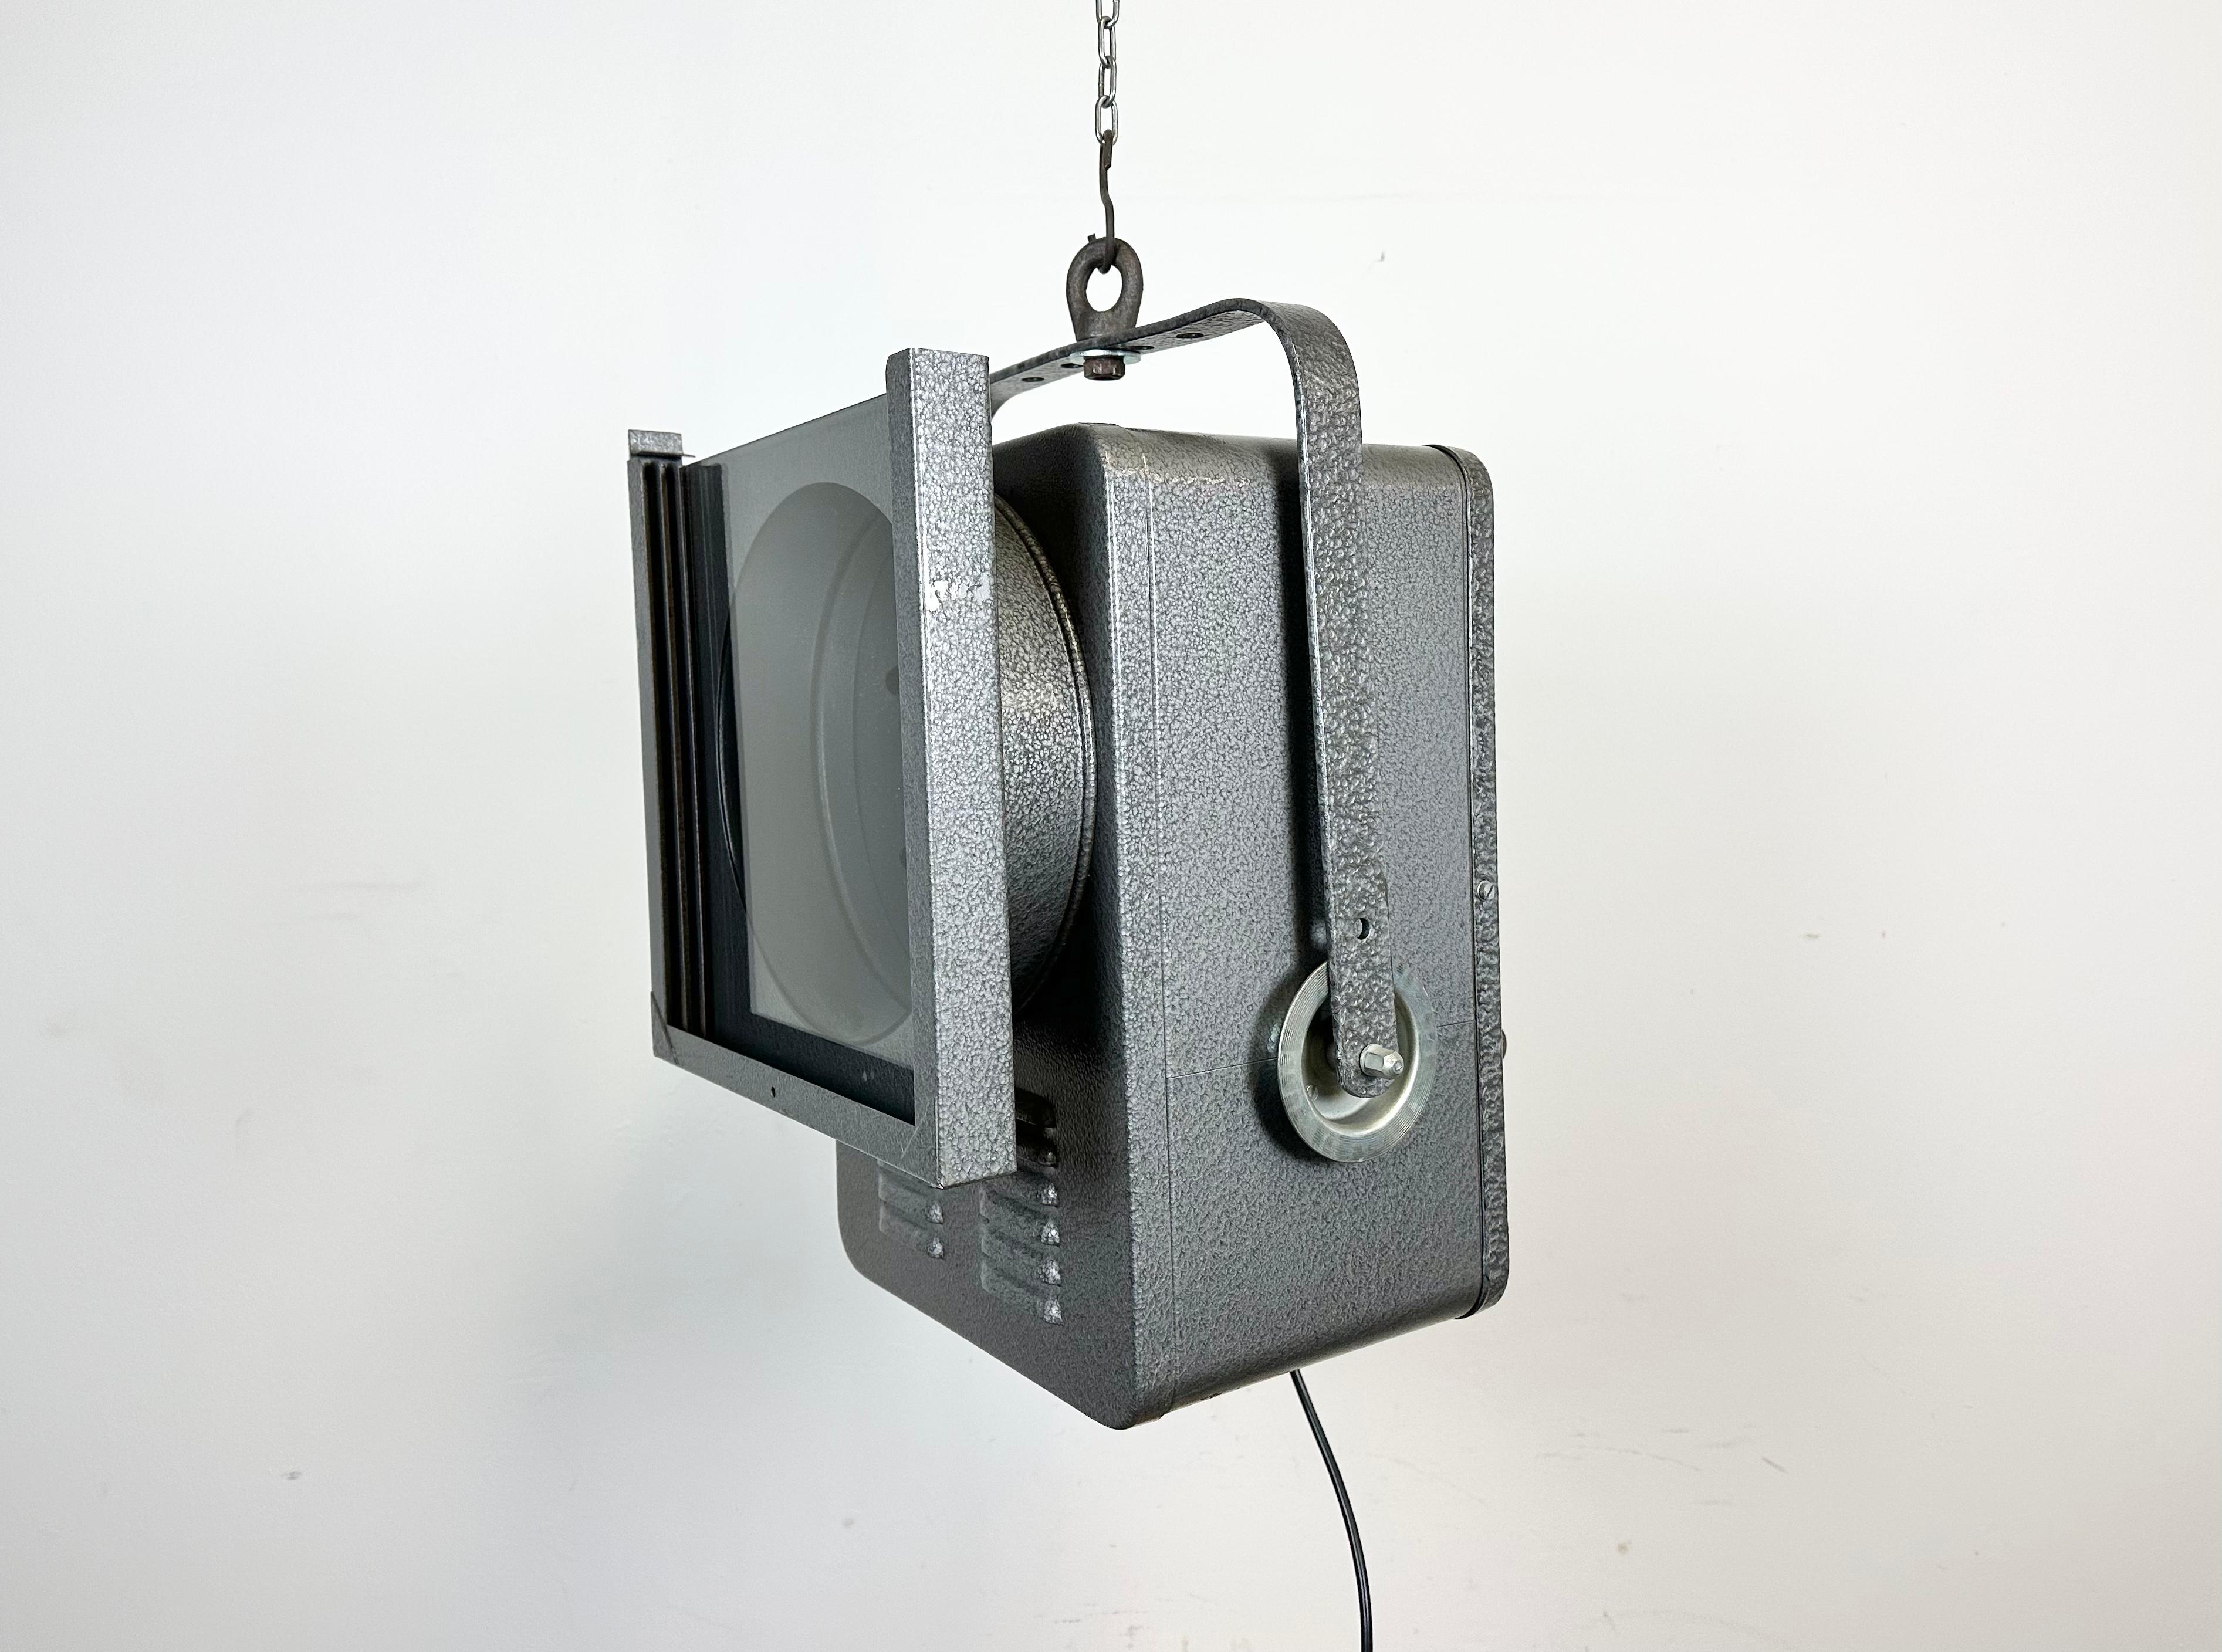 - Vintage theatre spotlight made in former Czechoslovakia during the 1980s 
- It features a grey hammerpaint metal body and clear glass cover
- The porcelain socket requires E27/ E26 lightbulbs 
- New wire
-The height of the spotlight is 48 cm.